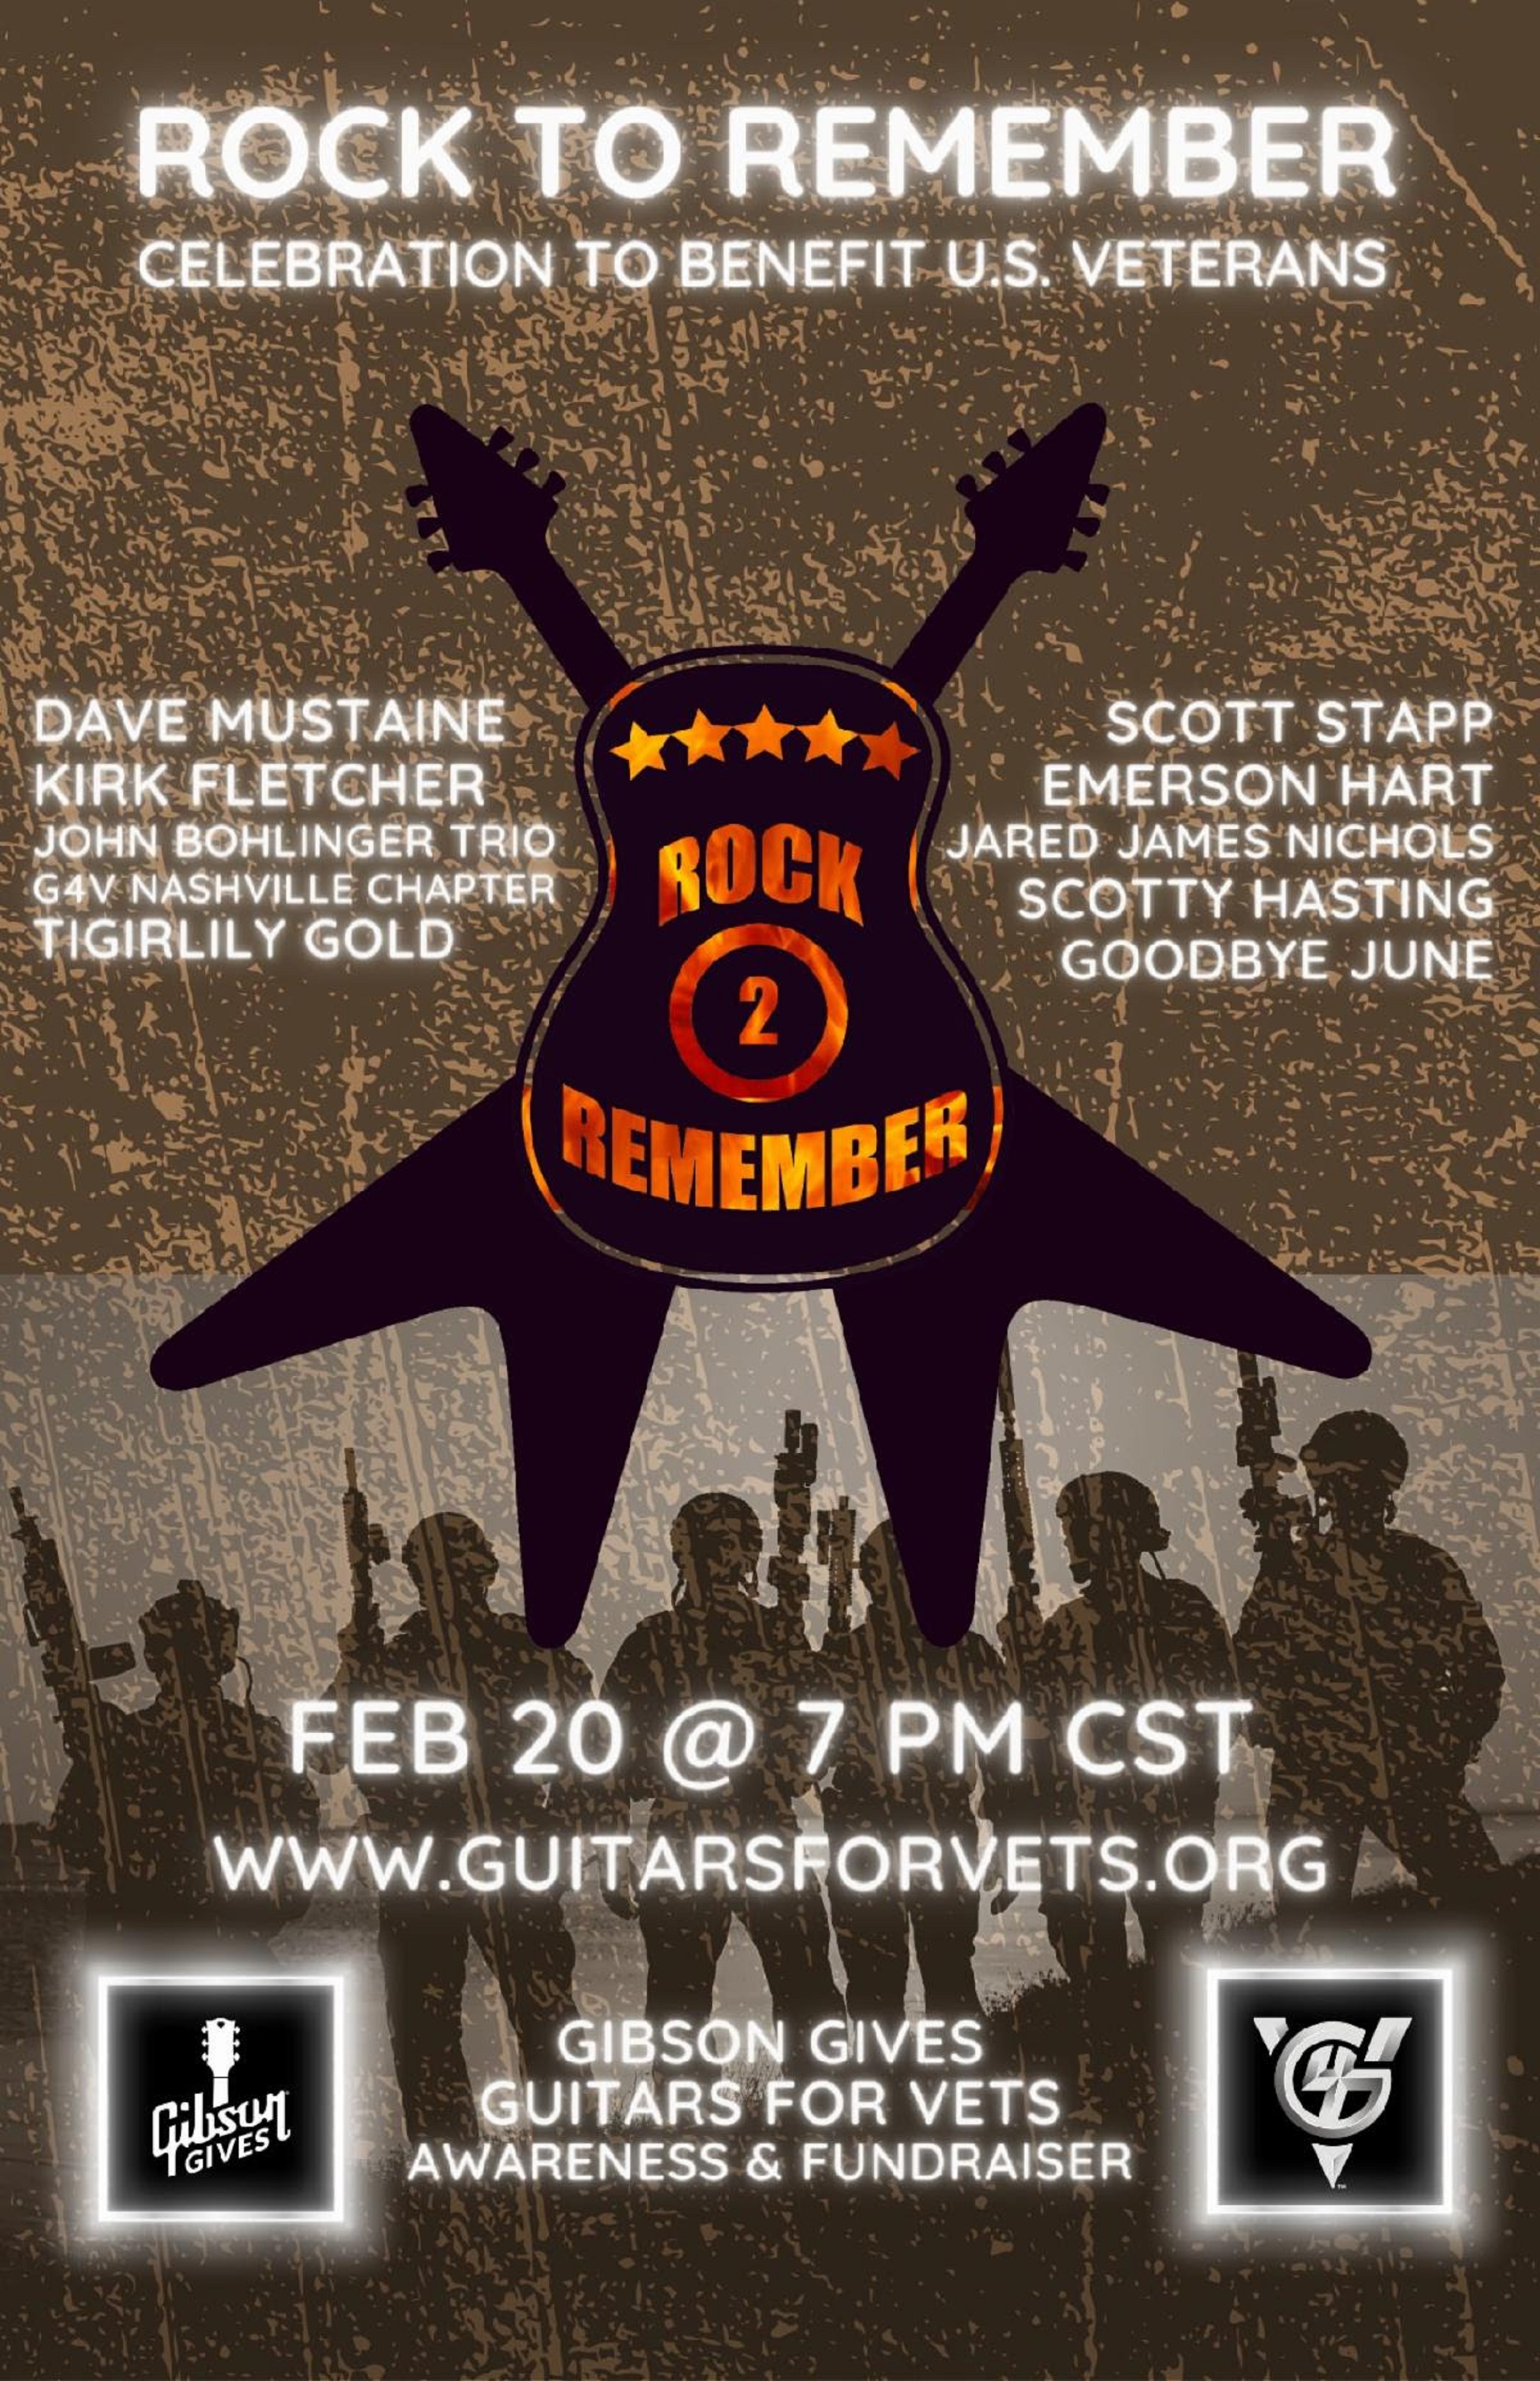 “Rock To Remember” Benefit Concert for U.S. Veterans Airs Tonight